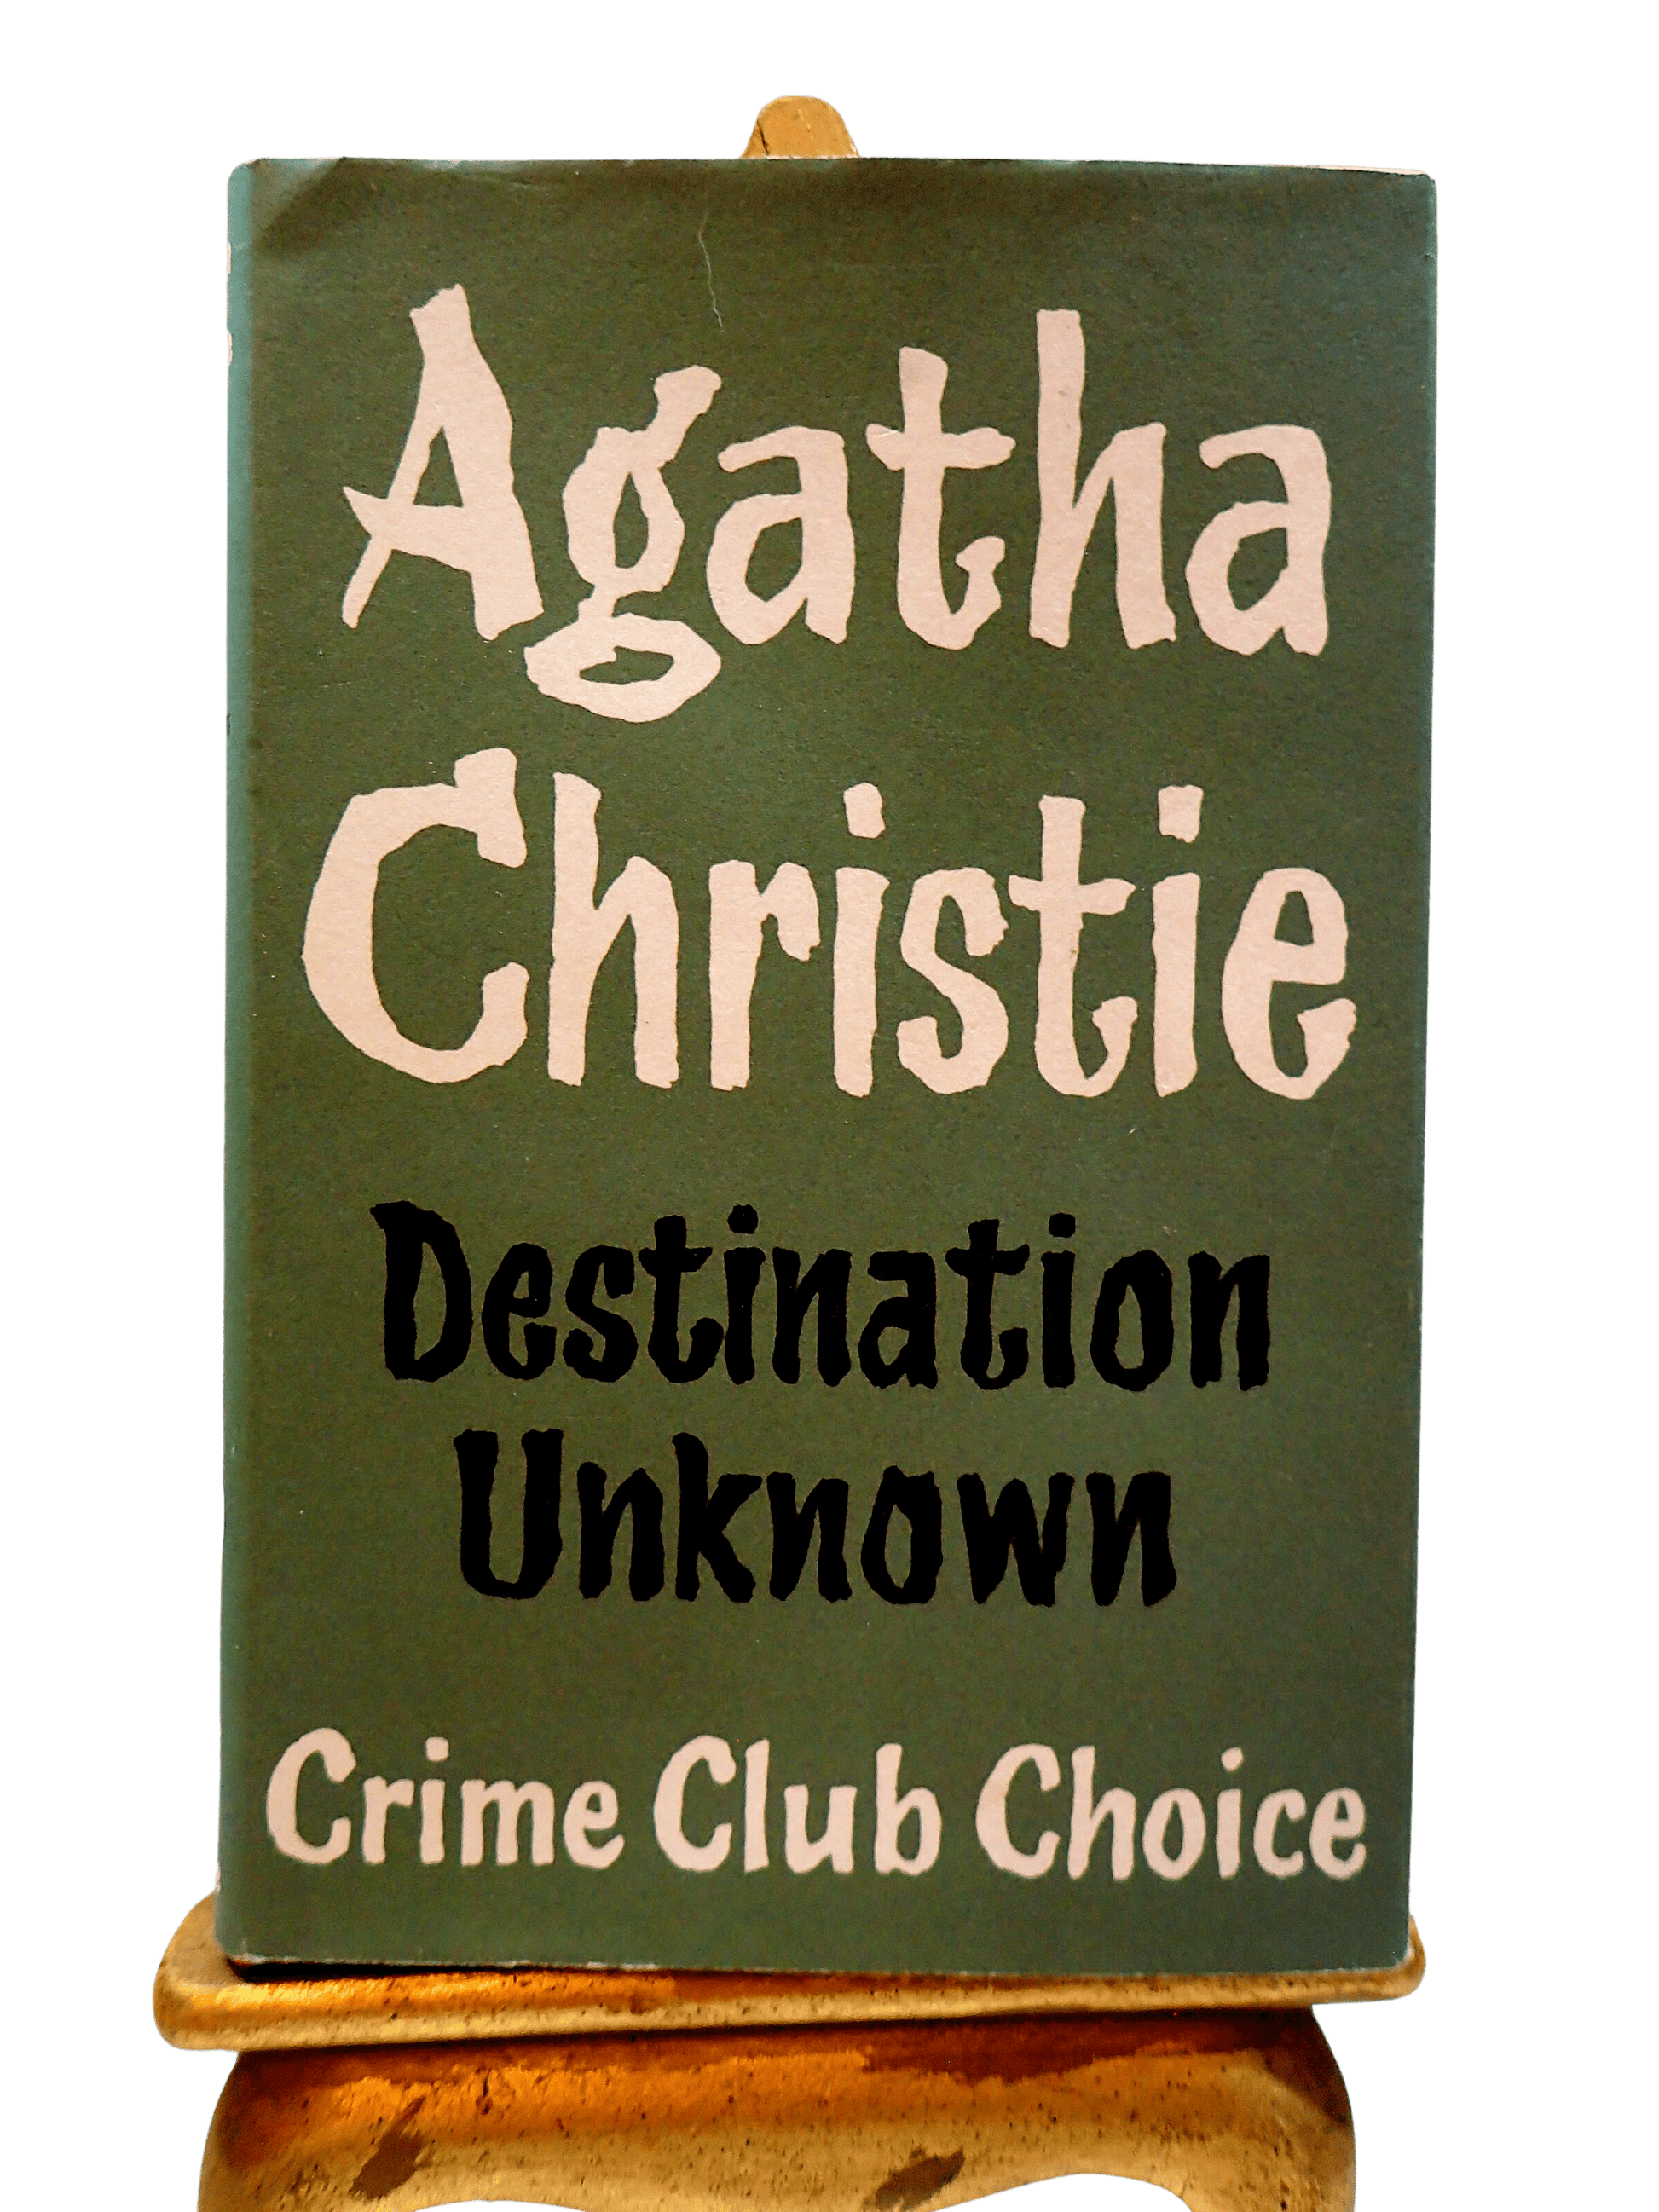 Destination Unknown Agatha Christie Hardback Crime Club Choice Facsimile Vintage book front cover showing black and white titles against grey green jacket. 